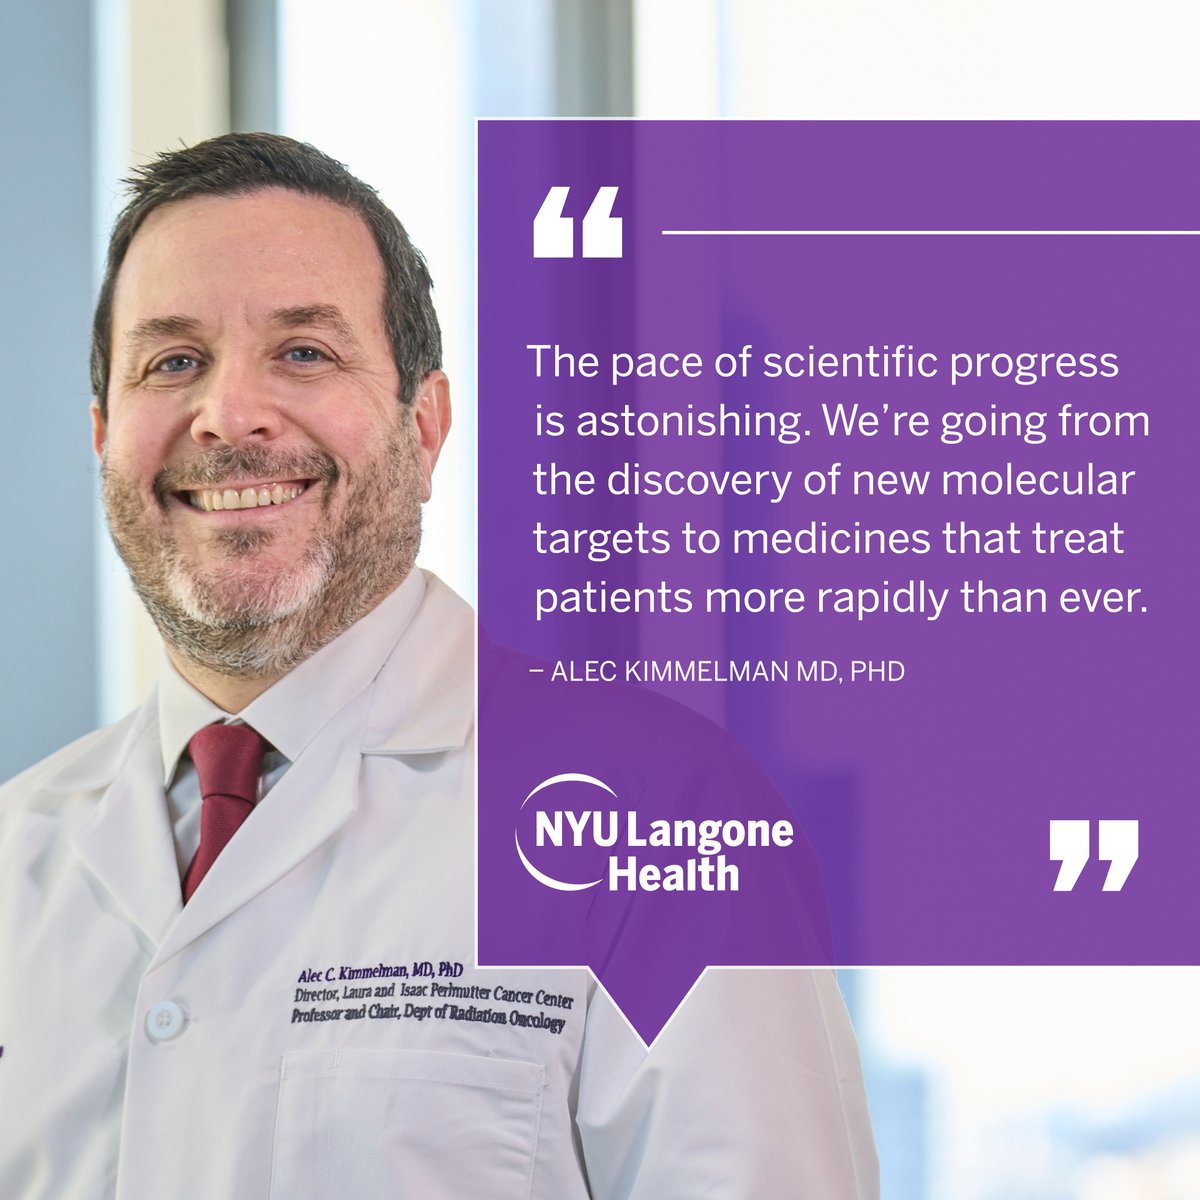 As the new director of NYU Langone Health’s @Perlmutter_CC, Dr. Alec Kimmelman is committed to advancing patient care and research amidst exciting developments in clinical trials, medications, and service expansions. Read six questions with Dr. Kimmelman: bit.ly/3UpQG9K